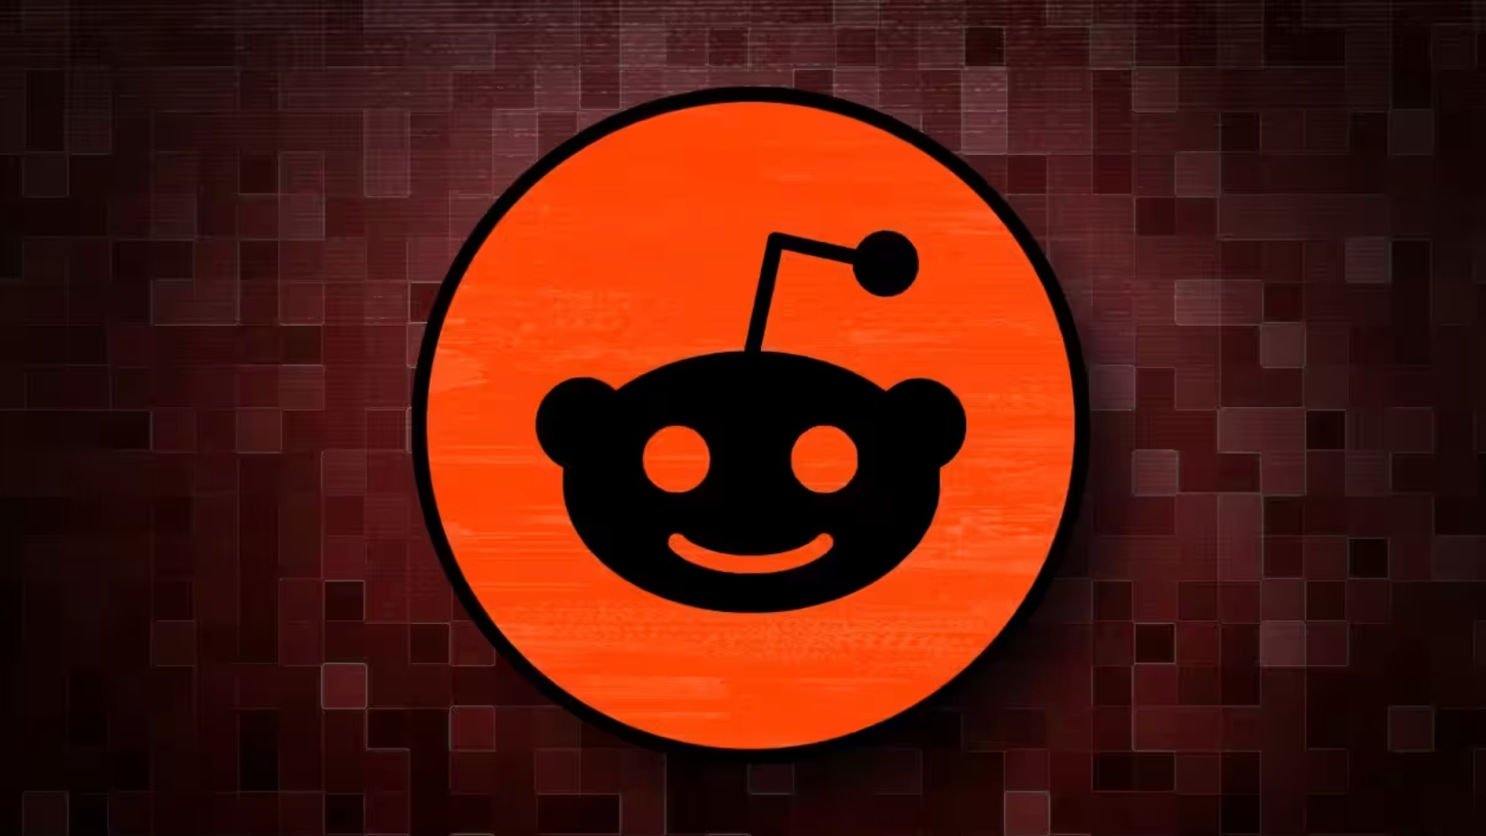 ALL] Petition to make this the permanent icon for the subreddit